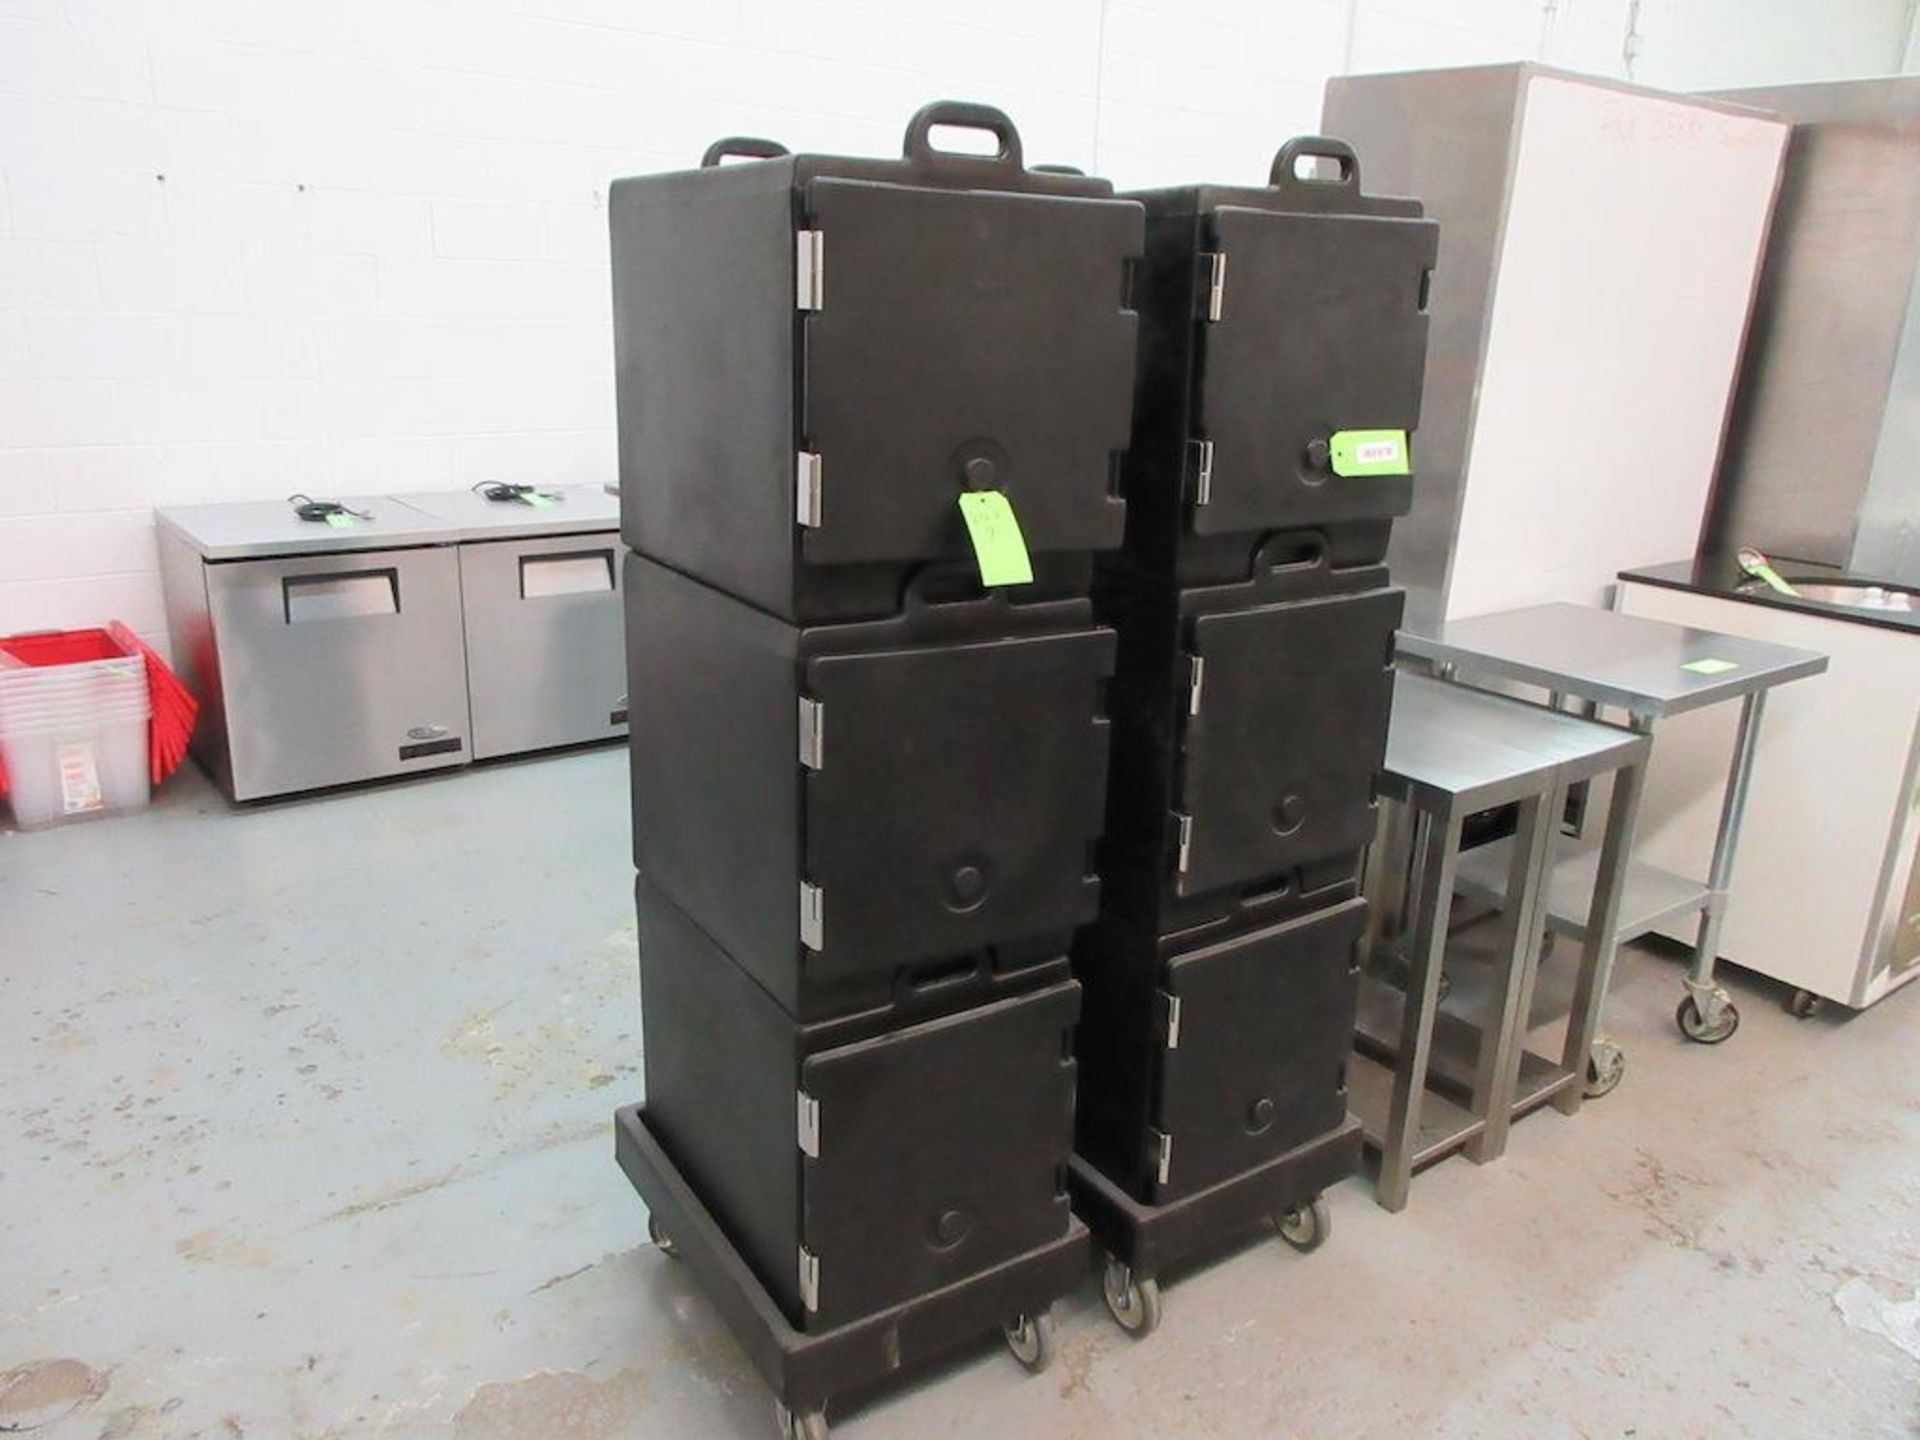 Lot 6 Cambro insulated transporters, 17"w x 24"d x 20"h, adjustable shelves, plus 2 rolling bases